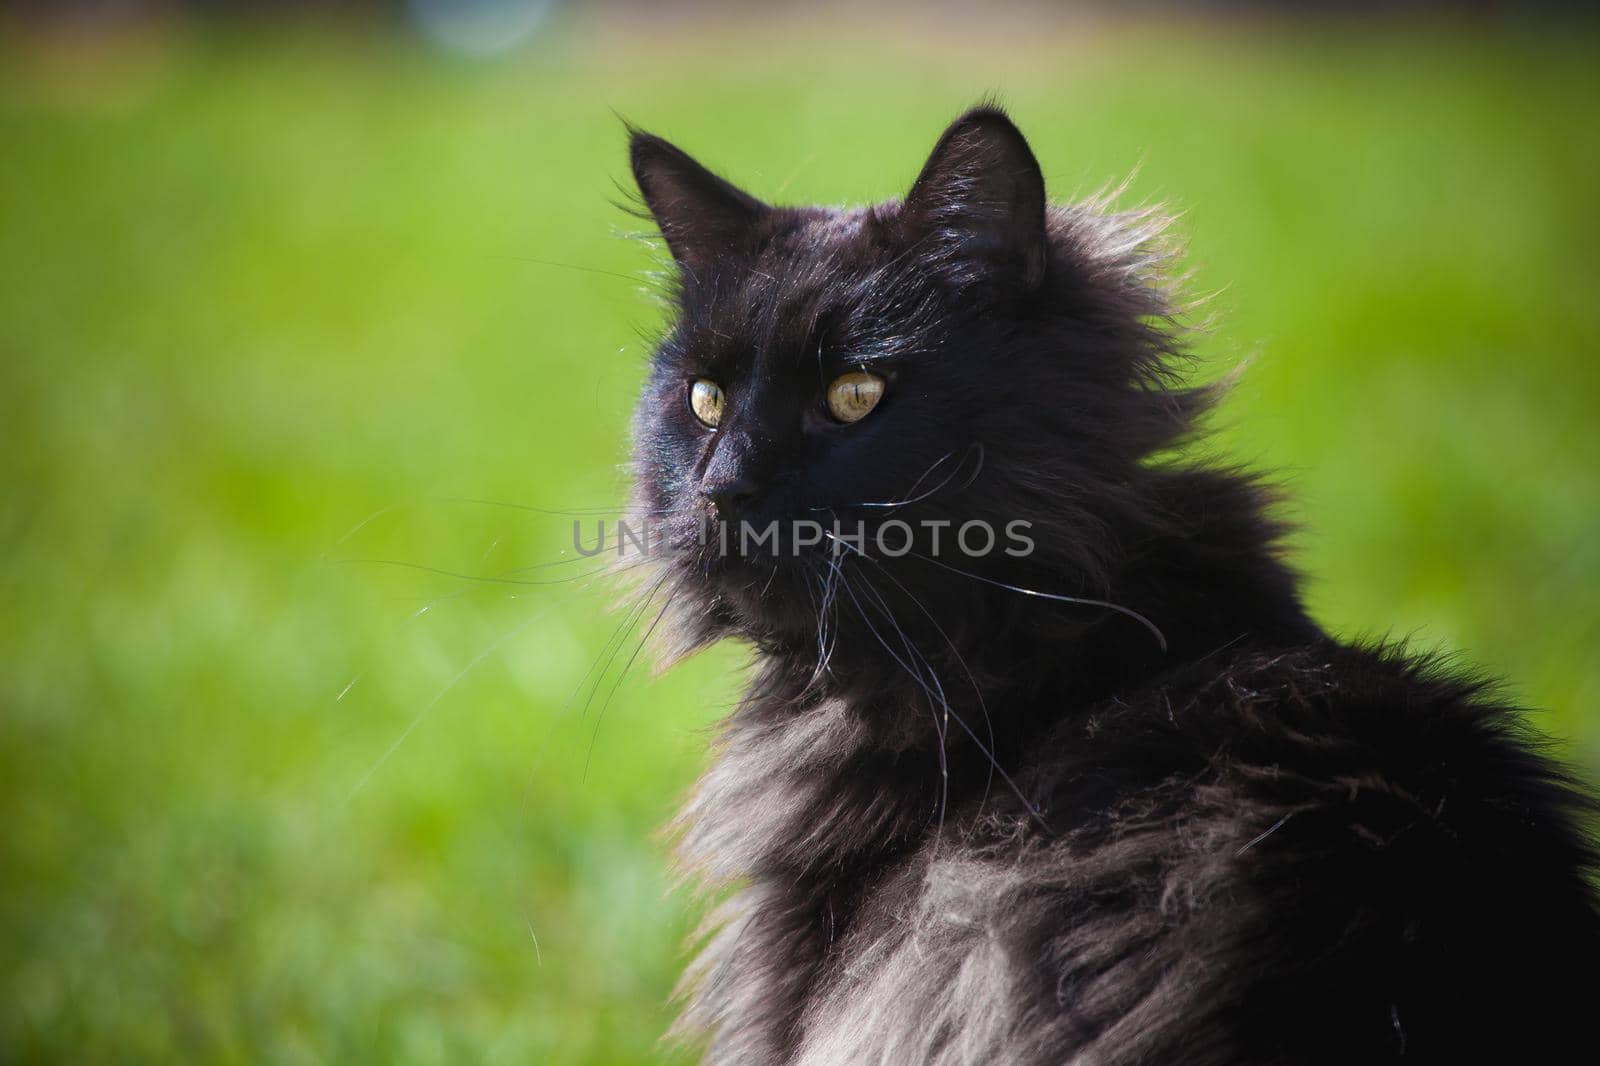 Adorable black Maine Coon cat on grass by RosaJay